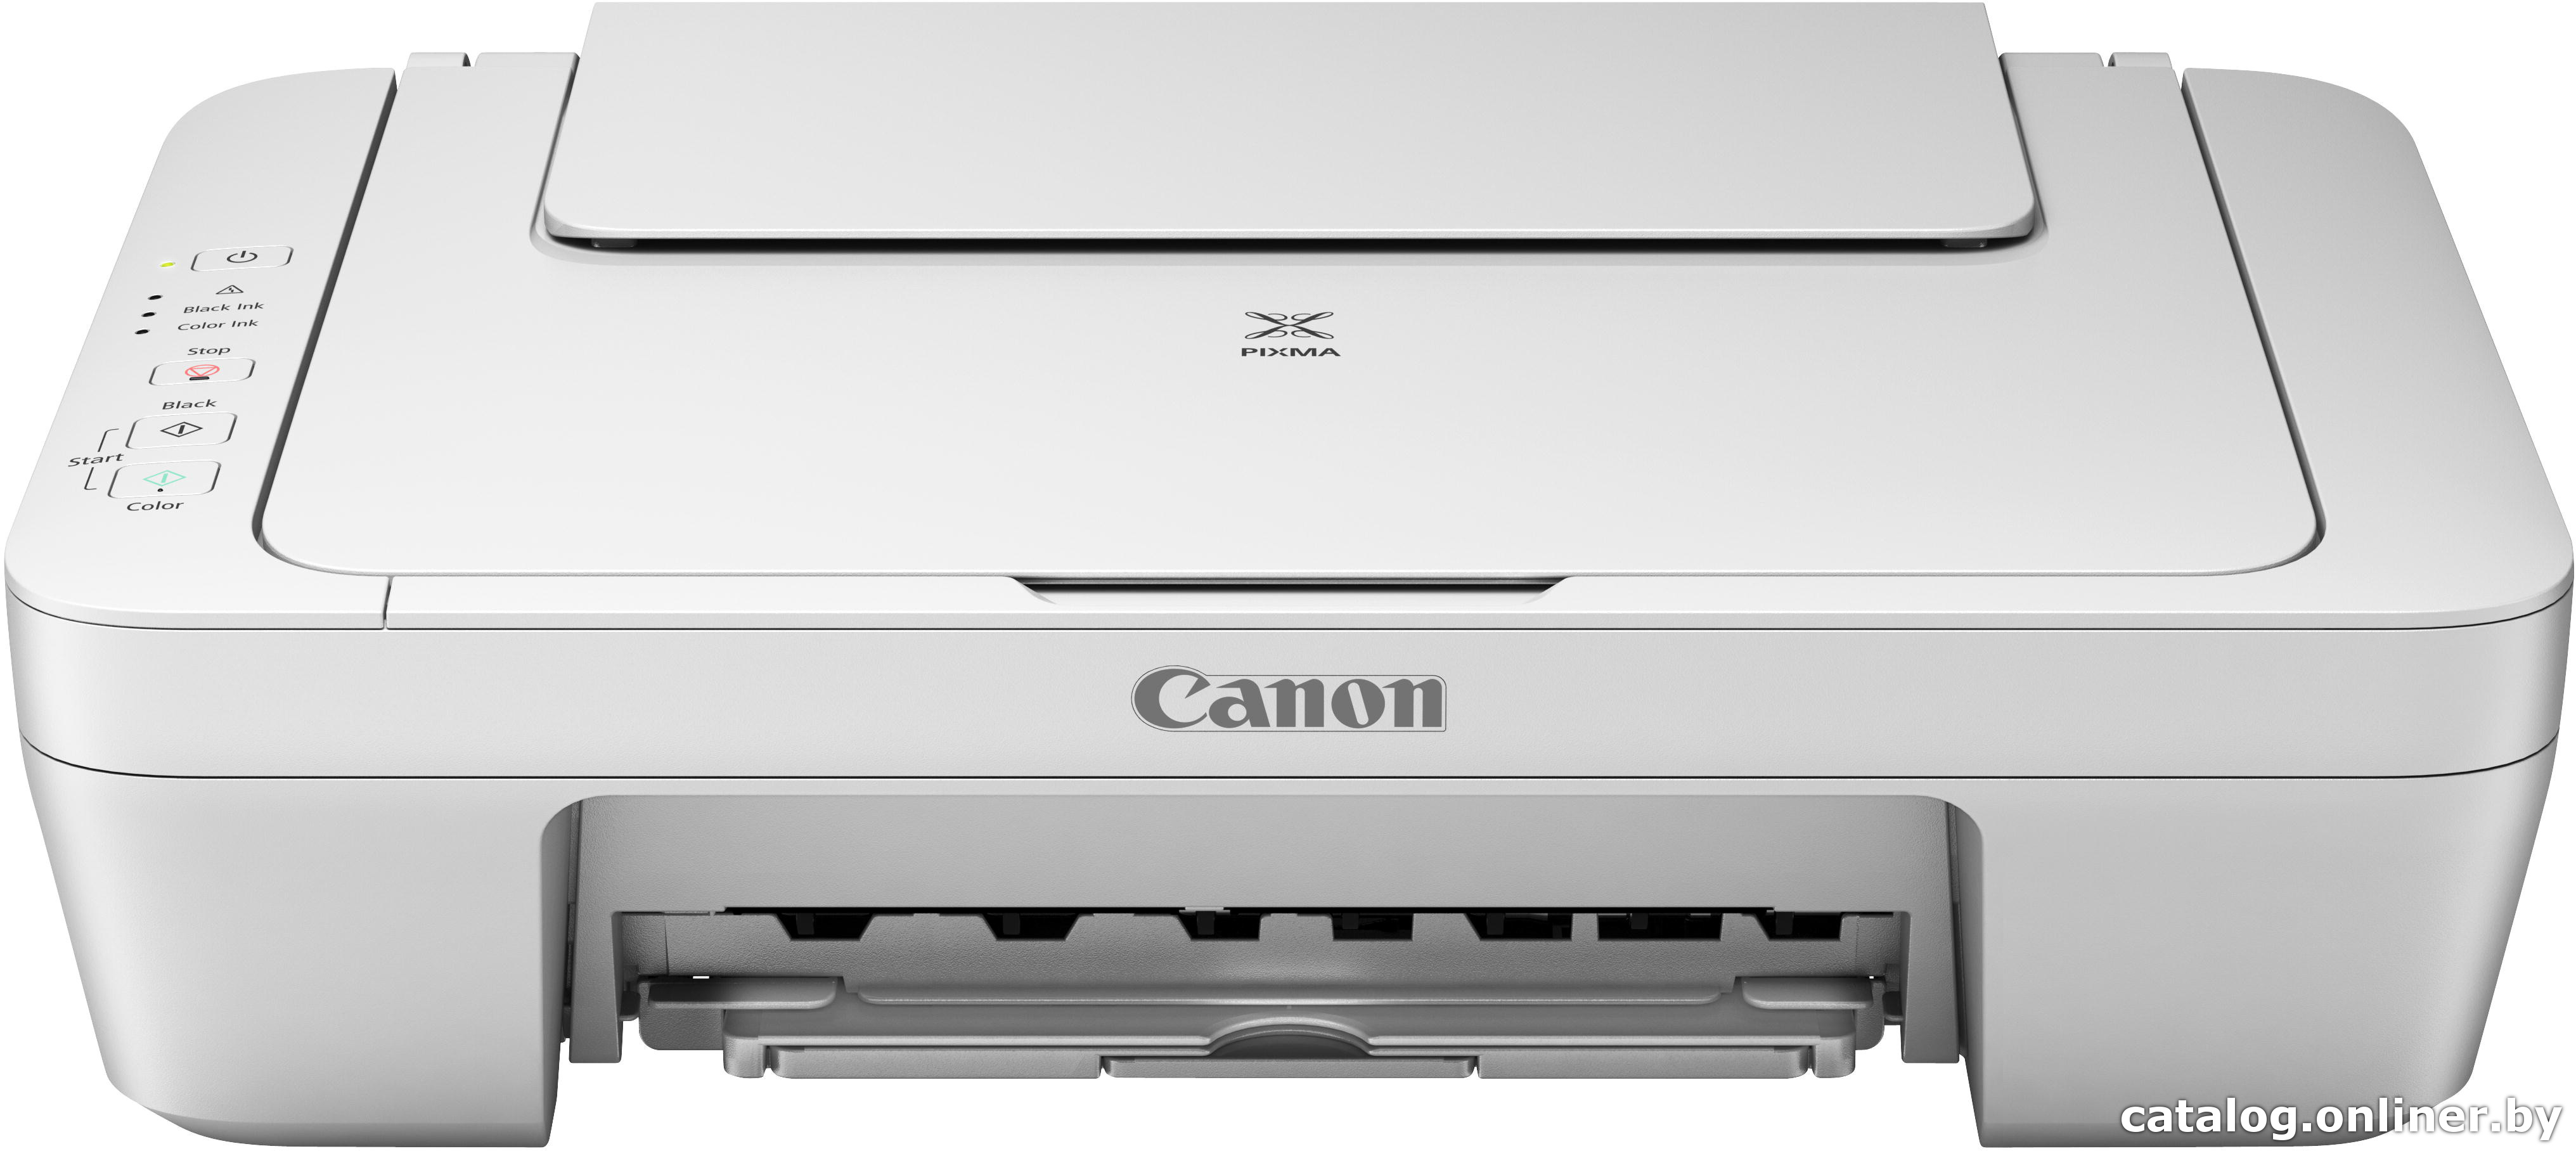 Canon MG2550 Driver Mac High Sierra How-to Download and Install - Featured